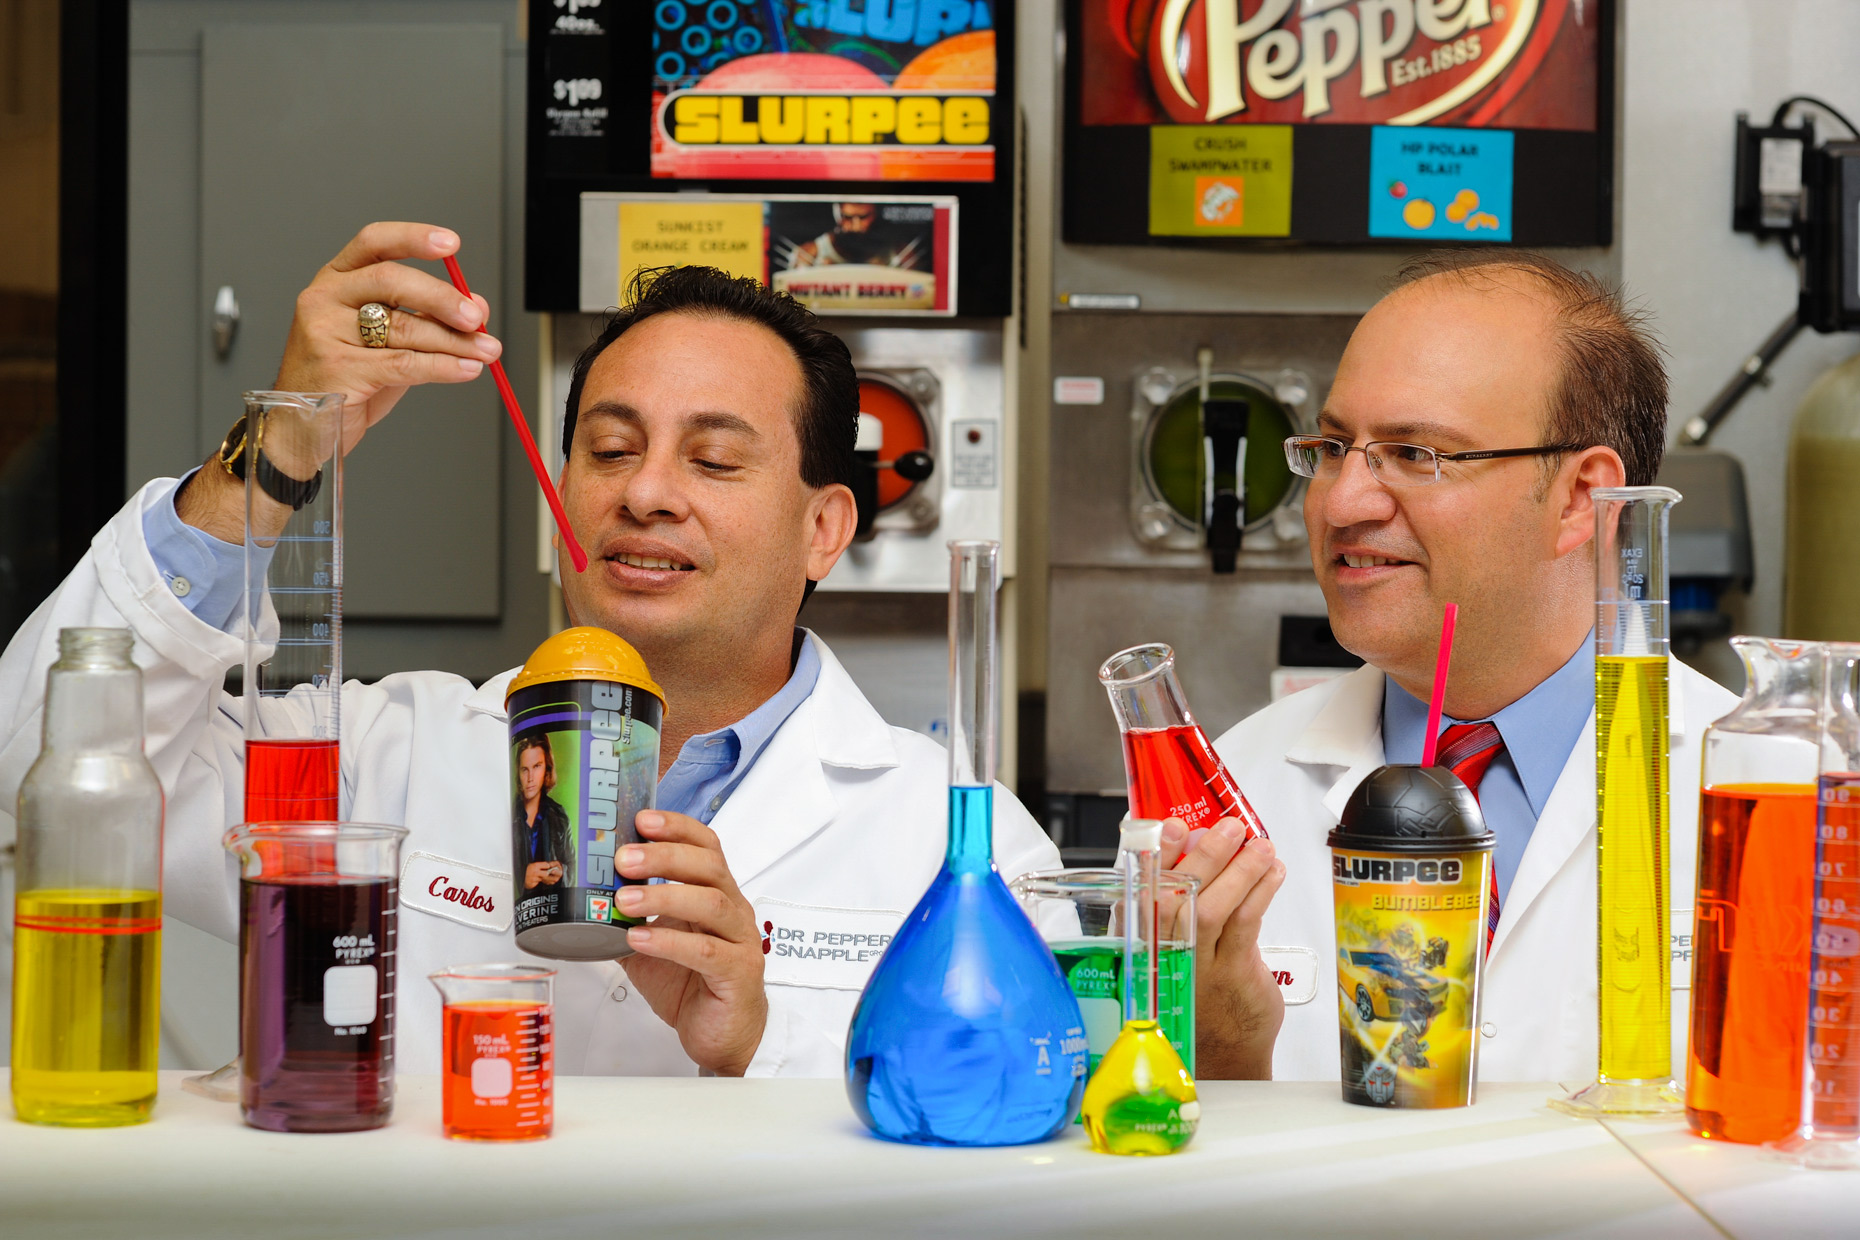 Dr Pepper Snapple Group lab photos by Kevin Brown